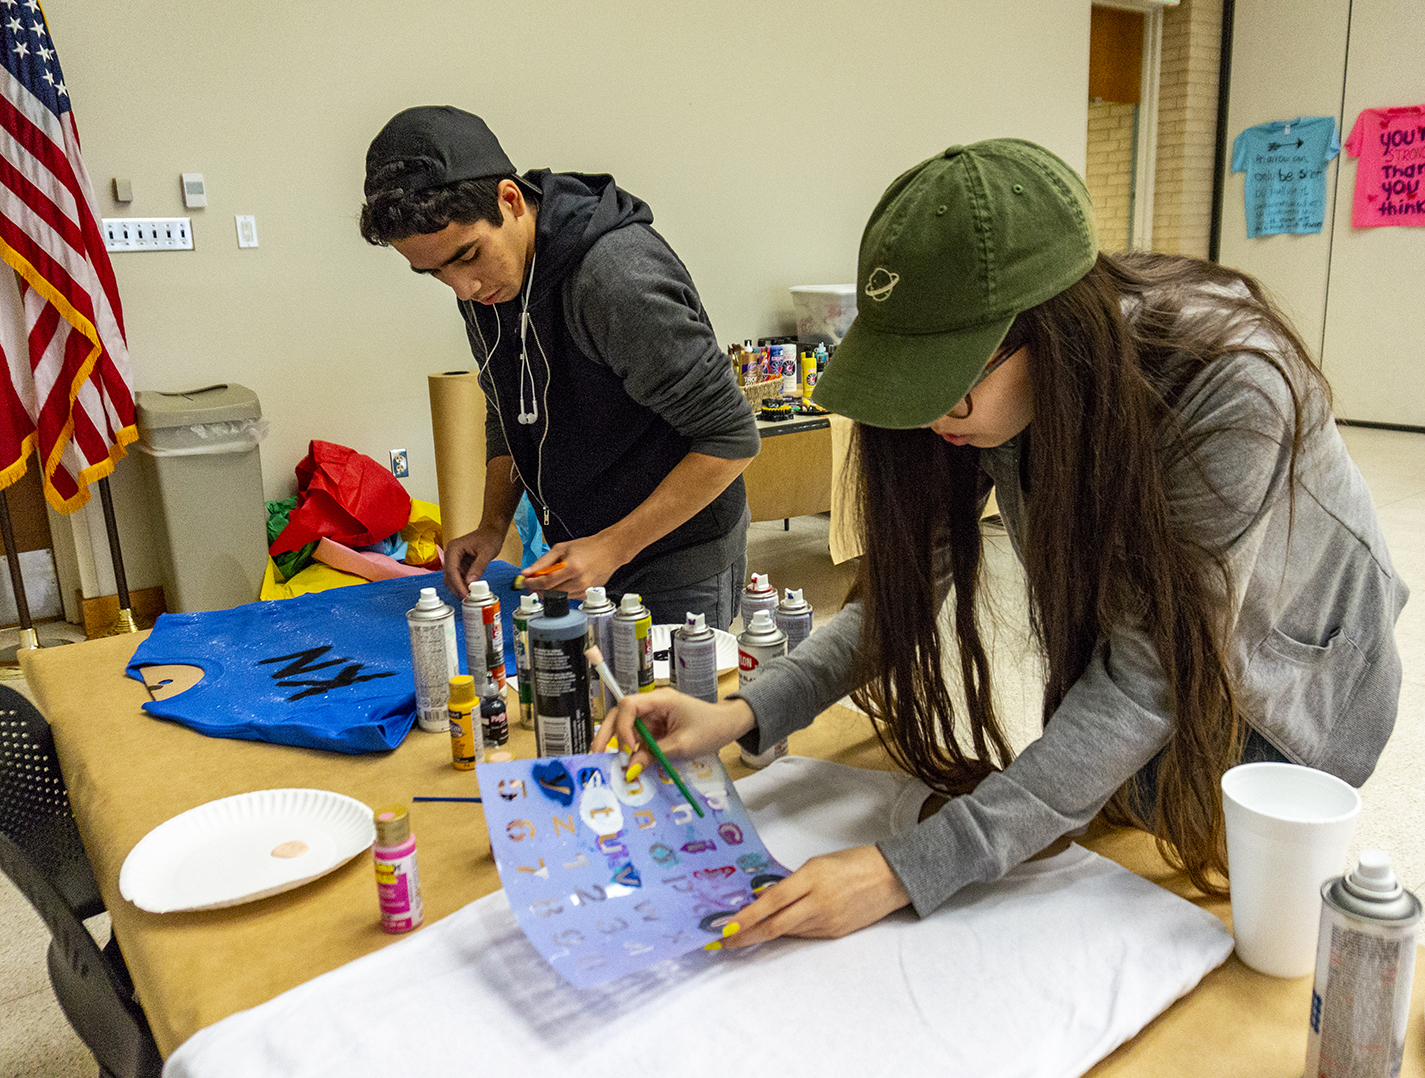 Students create T-shirts with words of encouragement for abuse or assault victims and to spread awareness about violence against women Oct. 18 on NW.